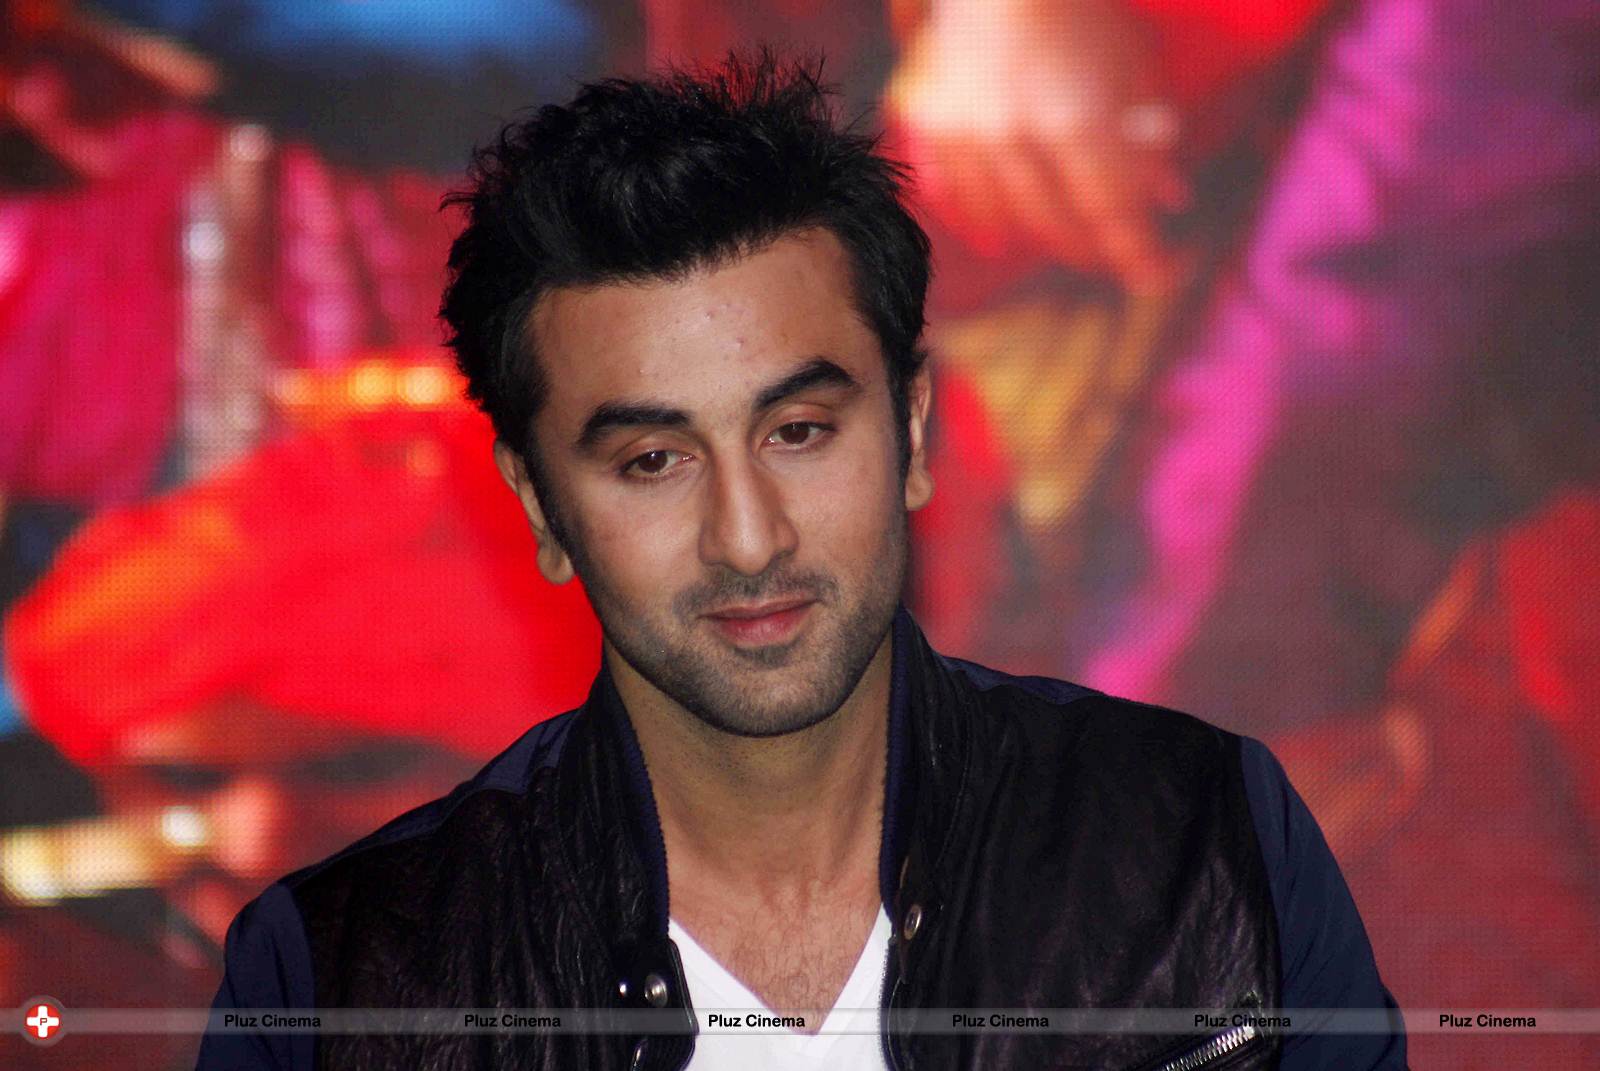 Ranbir Kapoor - Launch of song Aare Aare from film Besharam Photos | Picture 565356